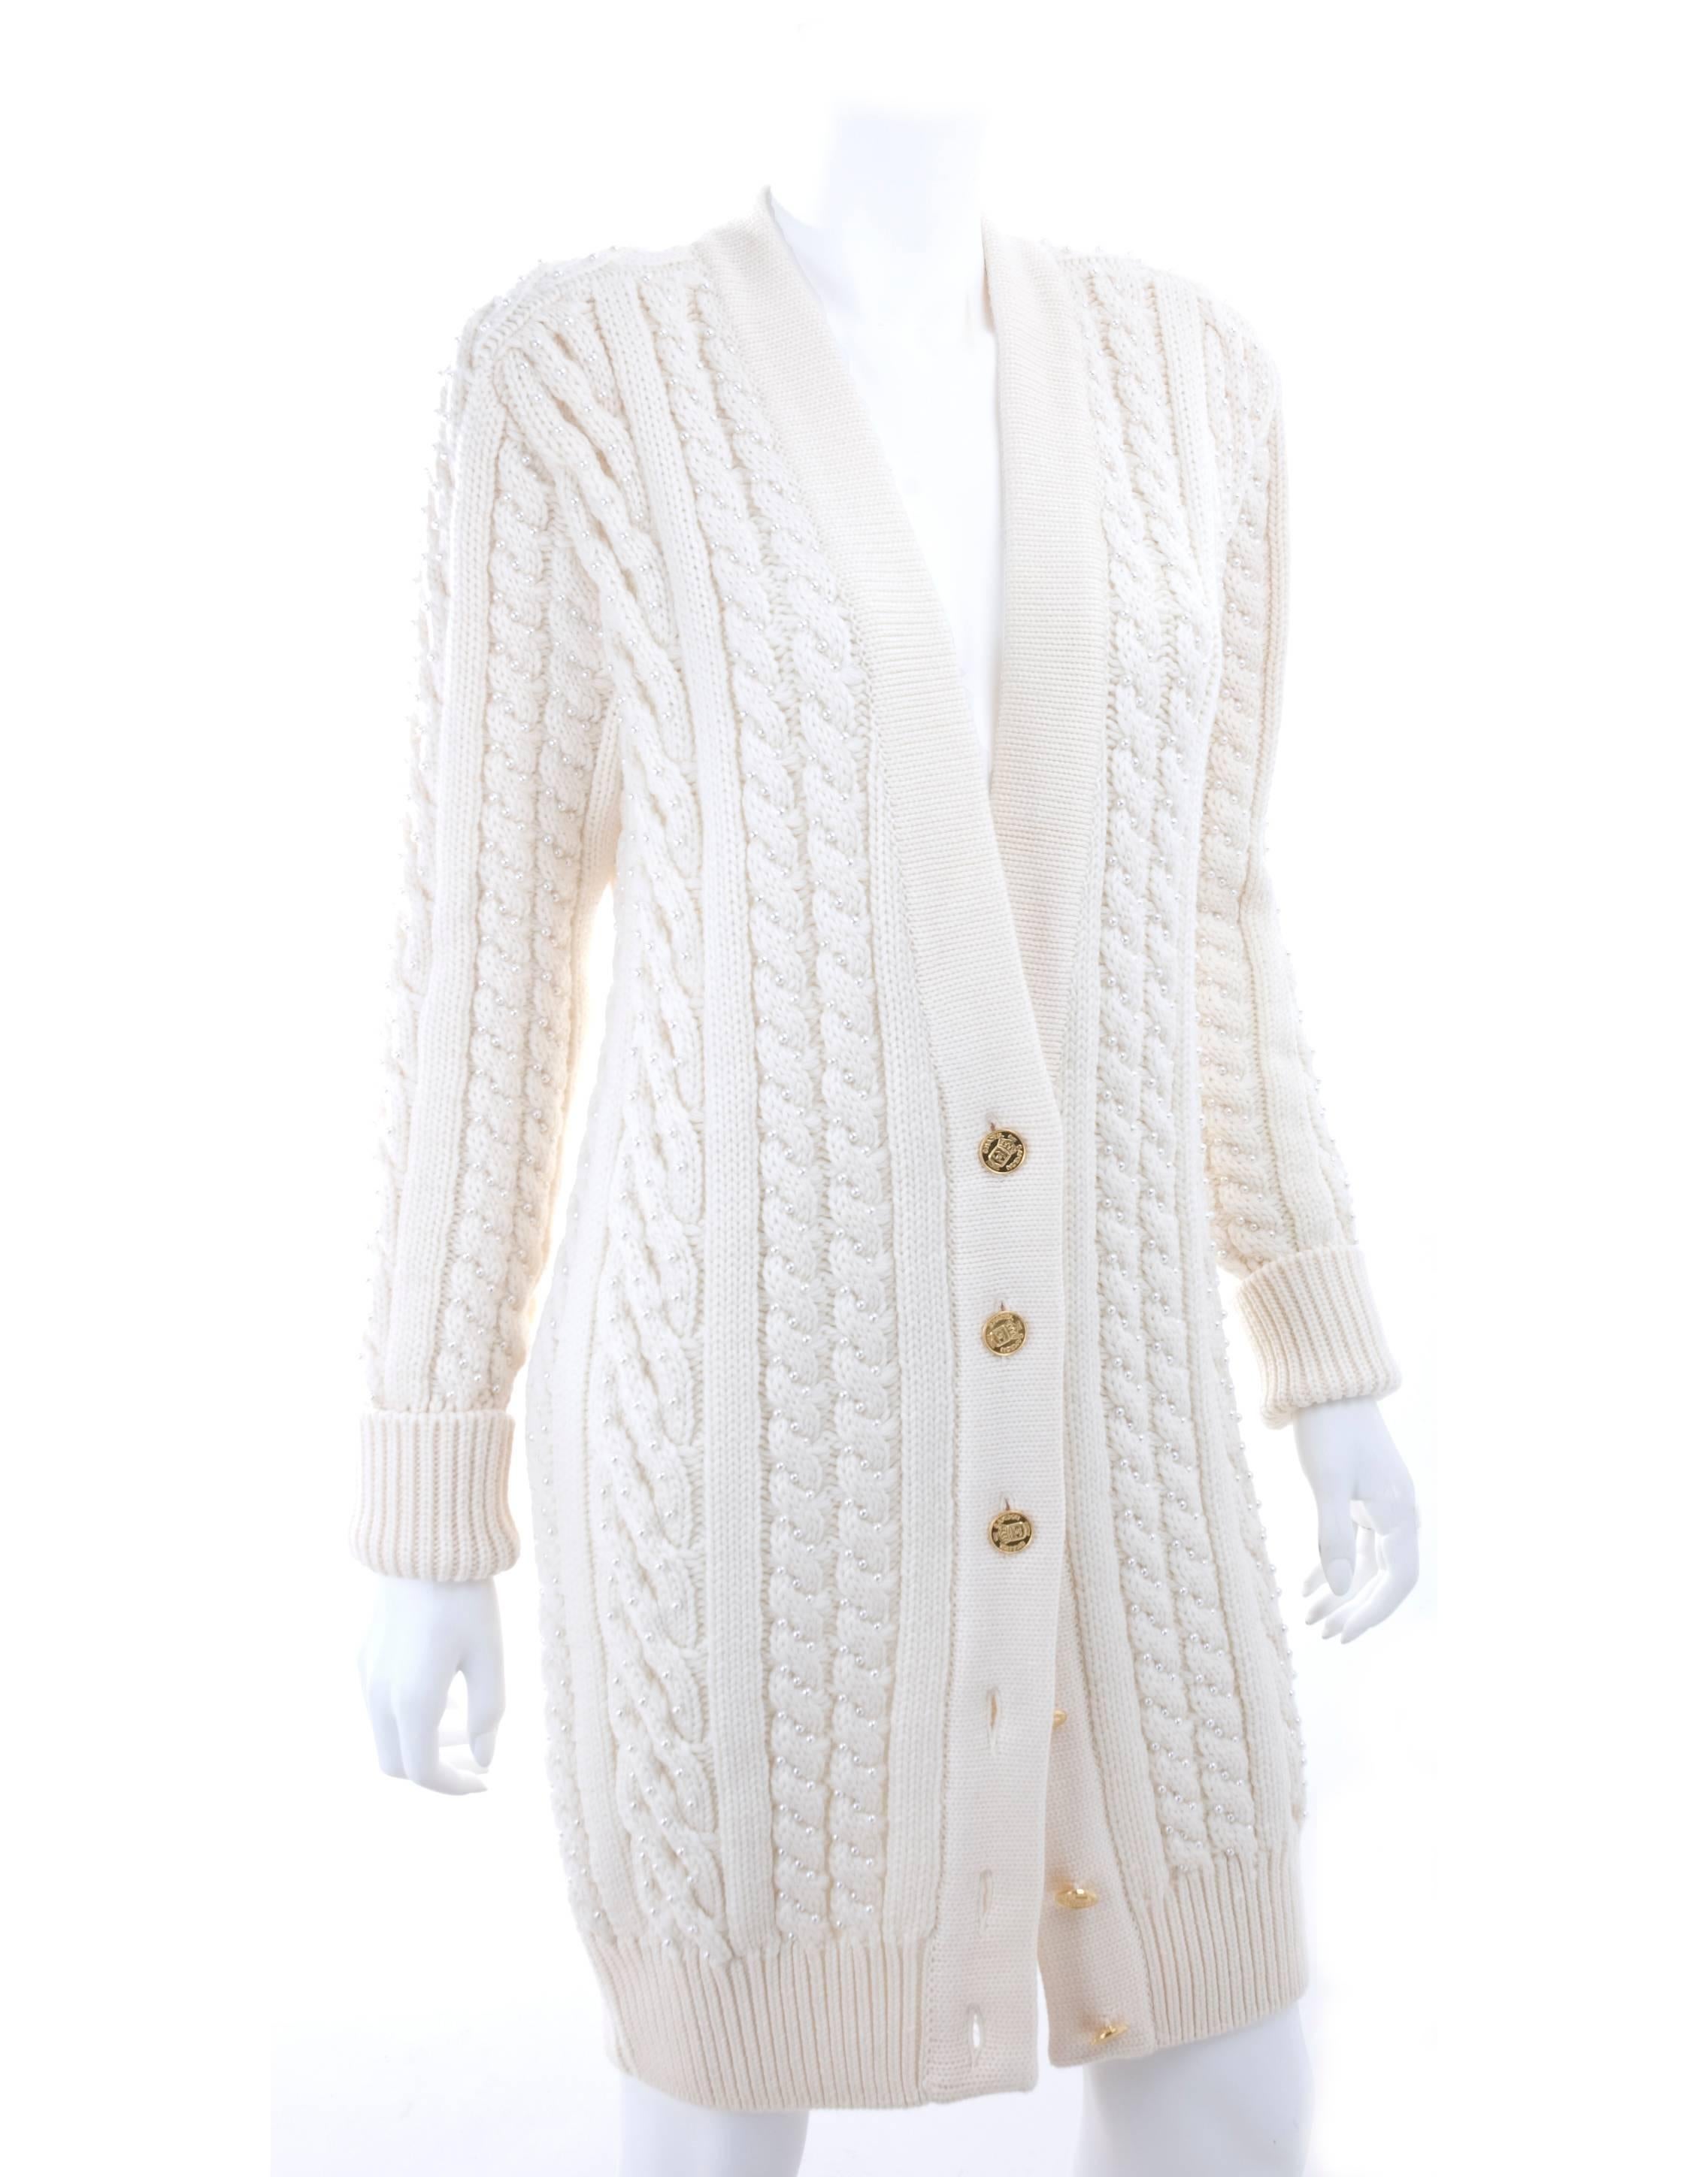 CHANEL pearl encrusted  cable knit cardigan from circa 1990.
Featuring a v-neck, long sleeves, a ribbed hem and cuffs and a button front fastening with gold-tone logo buttons and one extra.
No size label - should be Large.
Excellent condition -